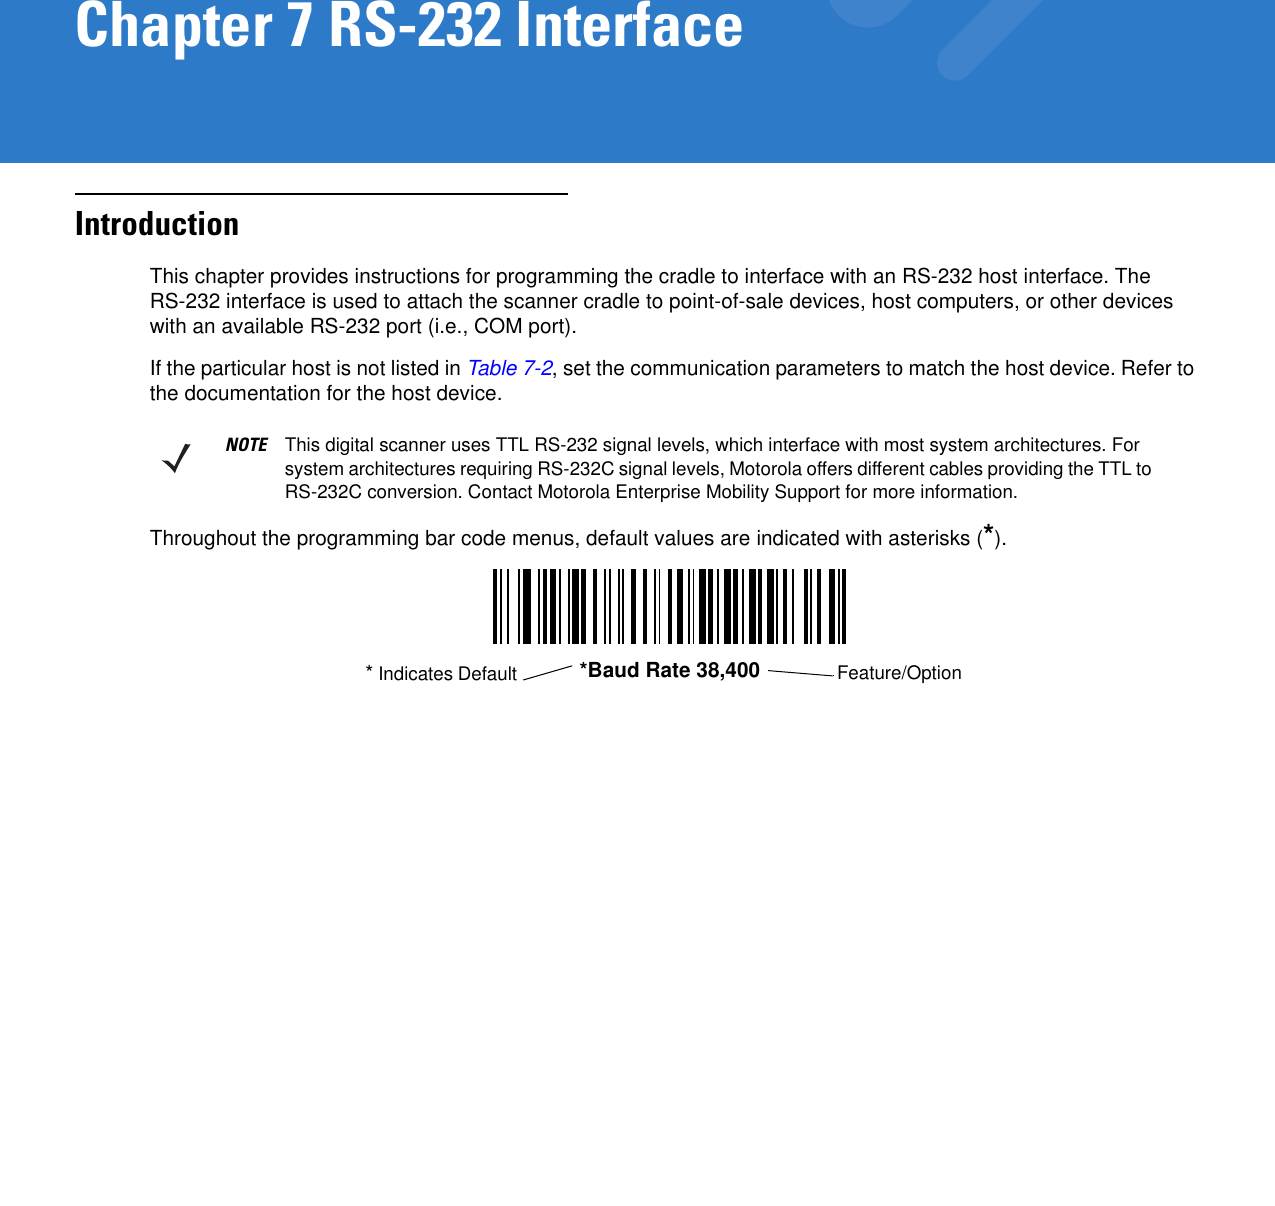 Chapter 7 RS-232 InterfaceIntroductionThis chapter provides instructions for programming the cradle to interface with an RS-232 host interface. The RS-232 interface is used to attach the scanner cradle to point-of-sale devices, host computers, or other devices with an available RS-232 port (i.e., COM port).If the particular host is not listed in Table 7-2, set the communication parameters to match the host device. Refer to the documentation for the host device.Throughout the programming bar code menus, default values are indicated with asterisks (*).NOTE This digital scanner uses TTL RS-232 signal levels, which interface with most system architectures. For system architectures requiring RS-232C signal levels, Motorola offers different cables providing the TTL to RS-232C conversion. Contact Motorola Enterprise Mobility Support for more information.*Baud Rate 38,400 Feature/Option* Indicates Default